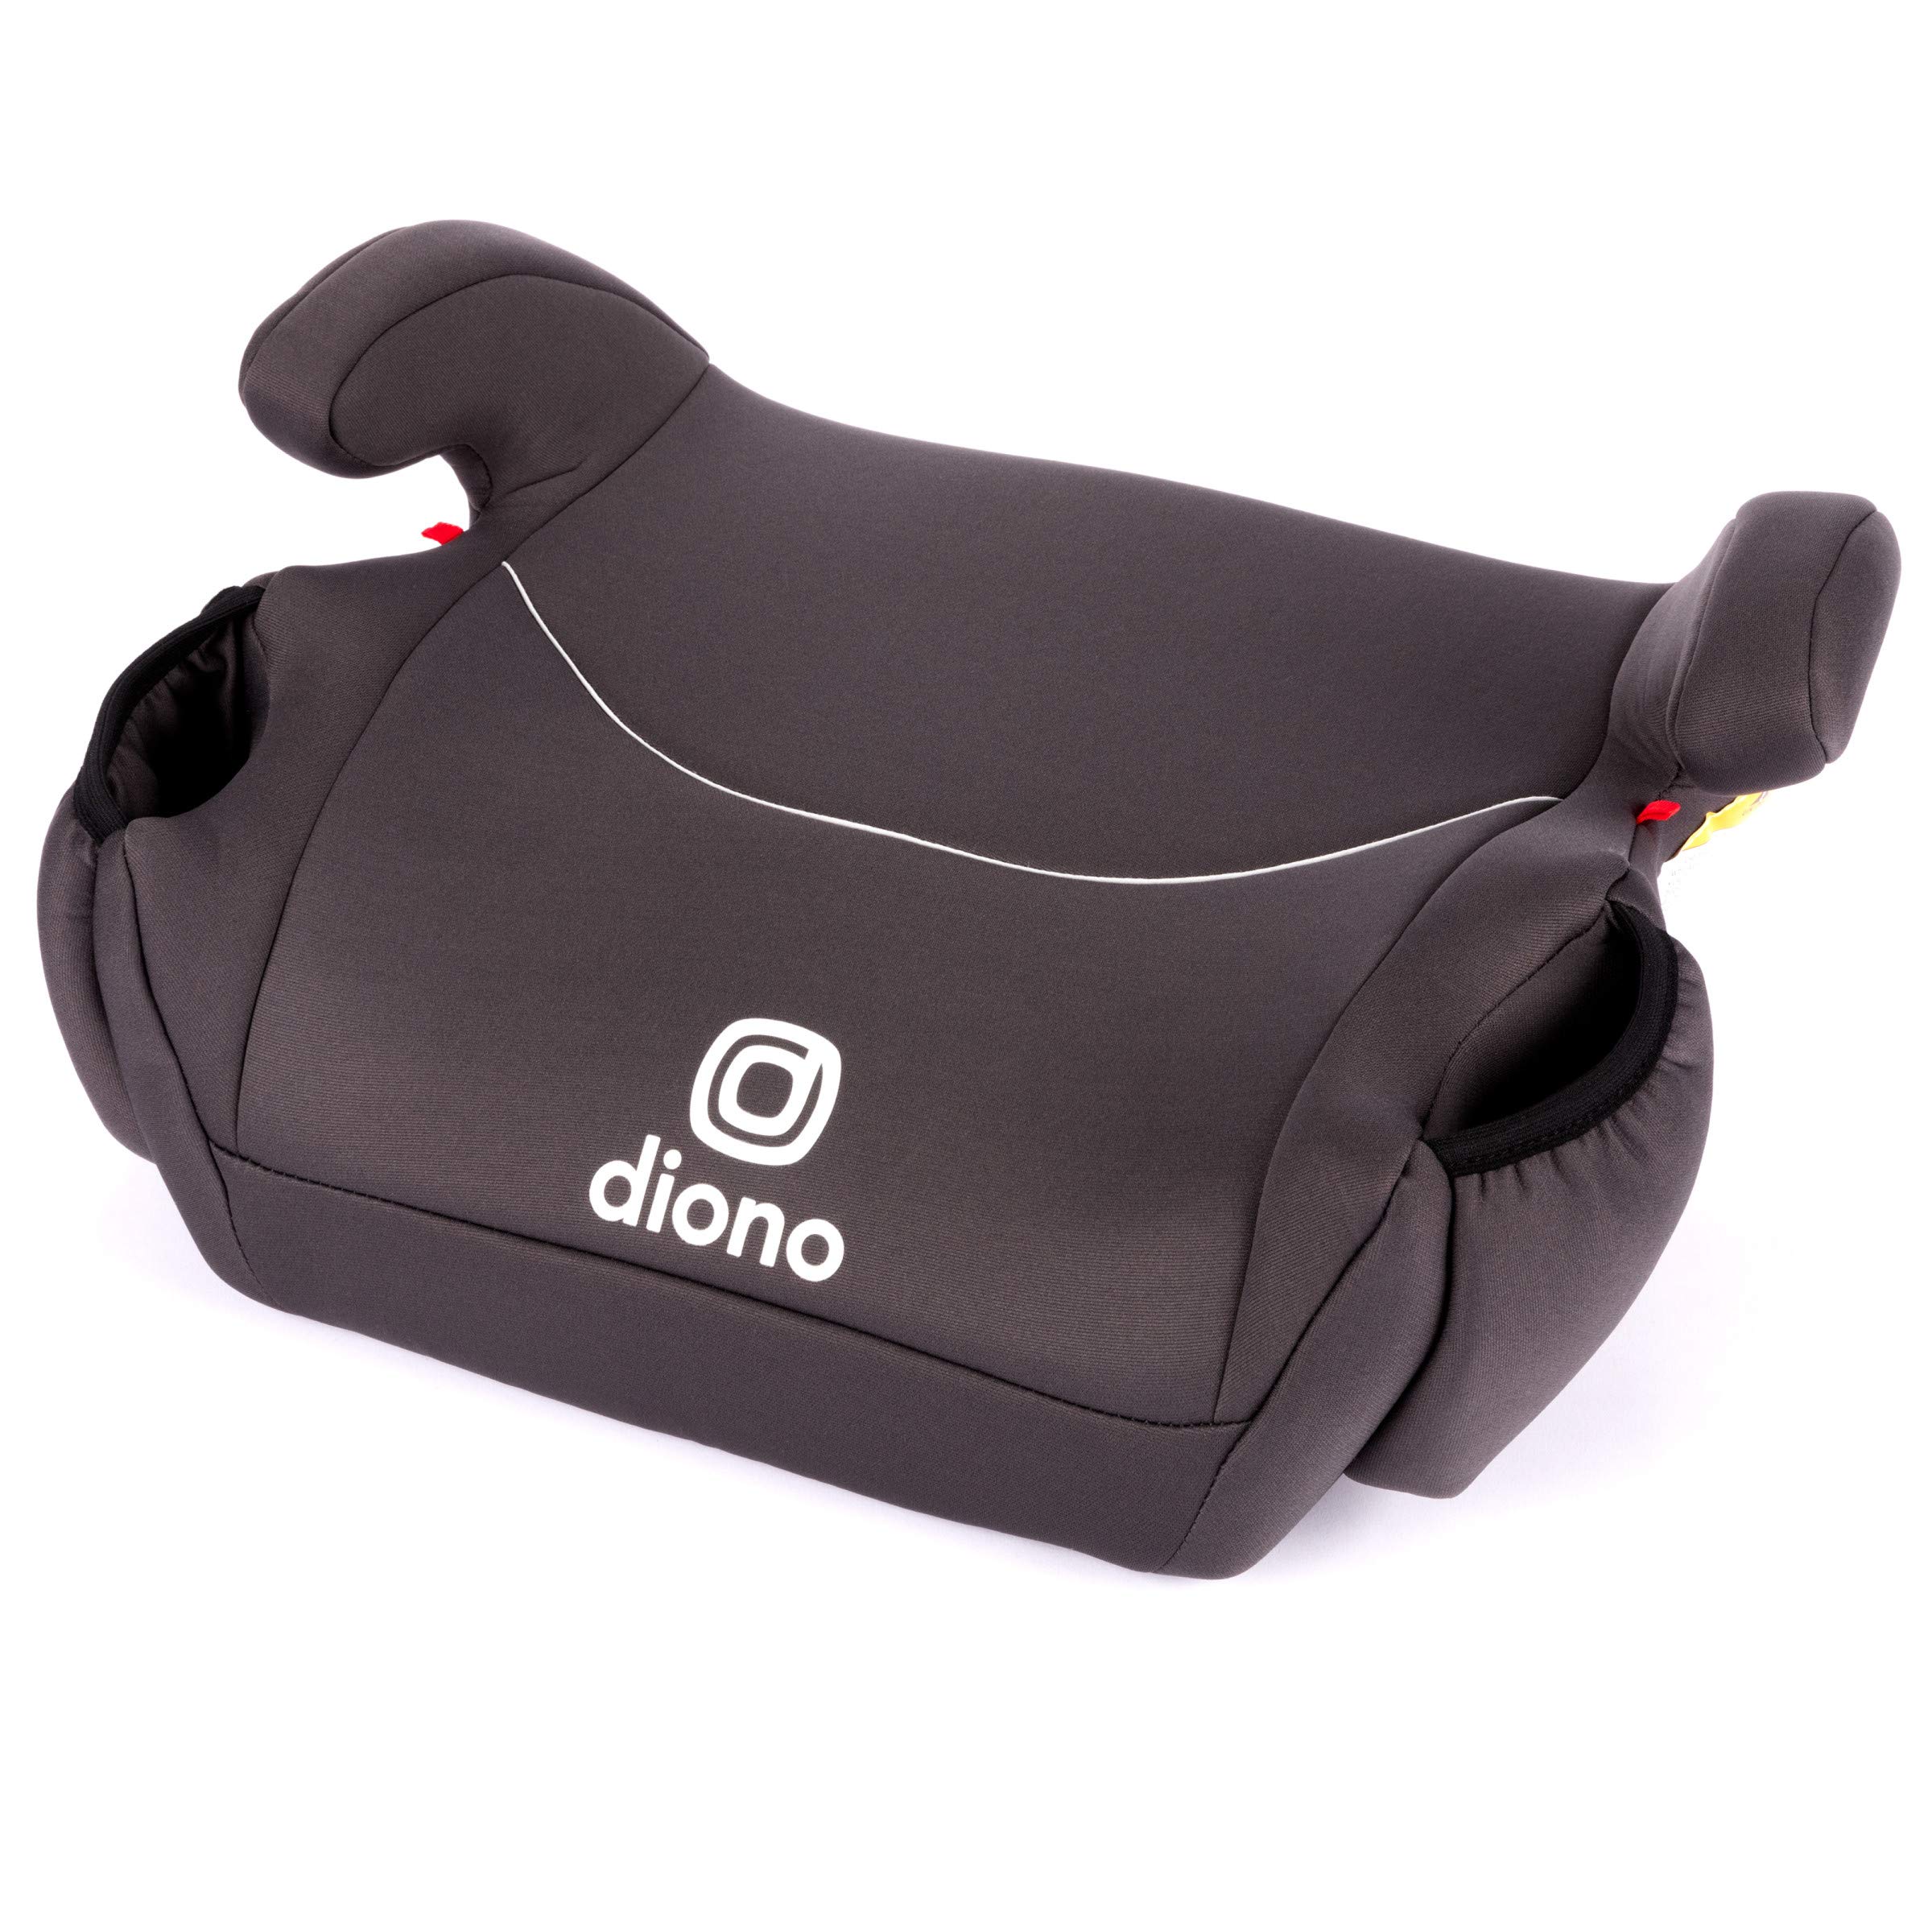 Diono Solana, No Latch, Pack of 2 Backless Booster Car Seats, Lightweight, Machine Washable Covers, Cup Holders, Black